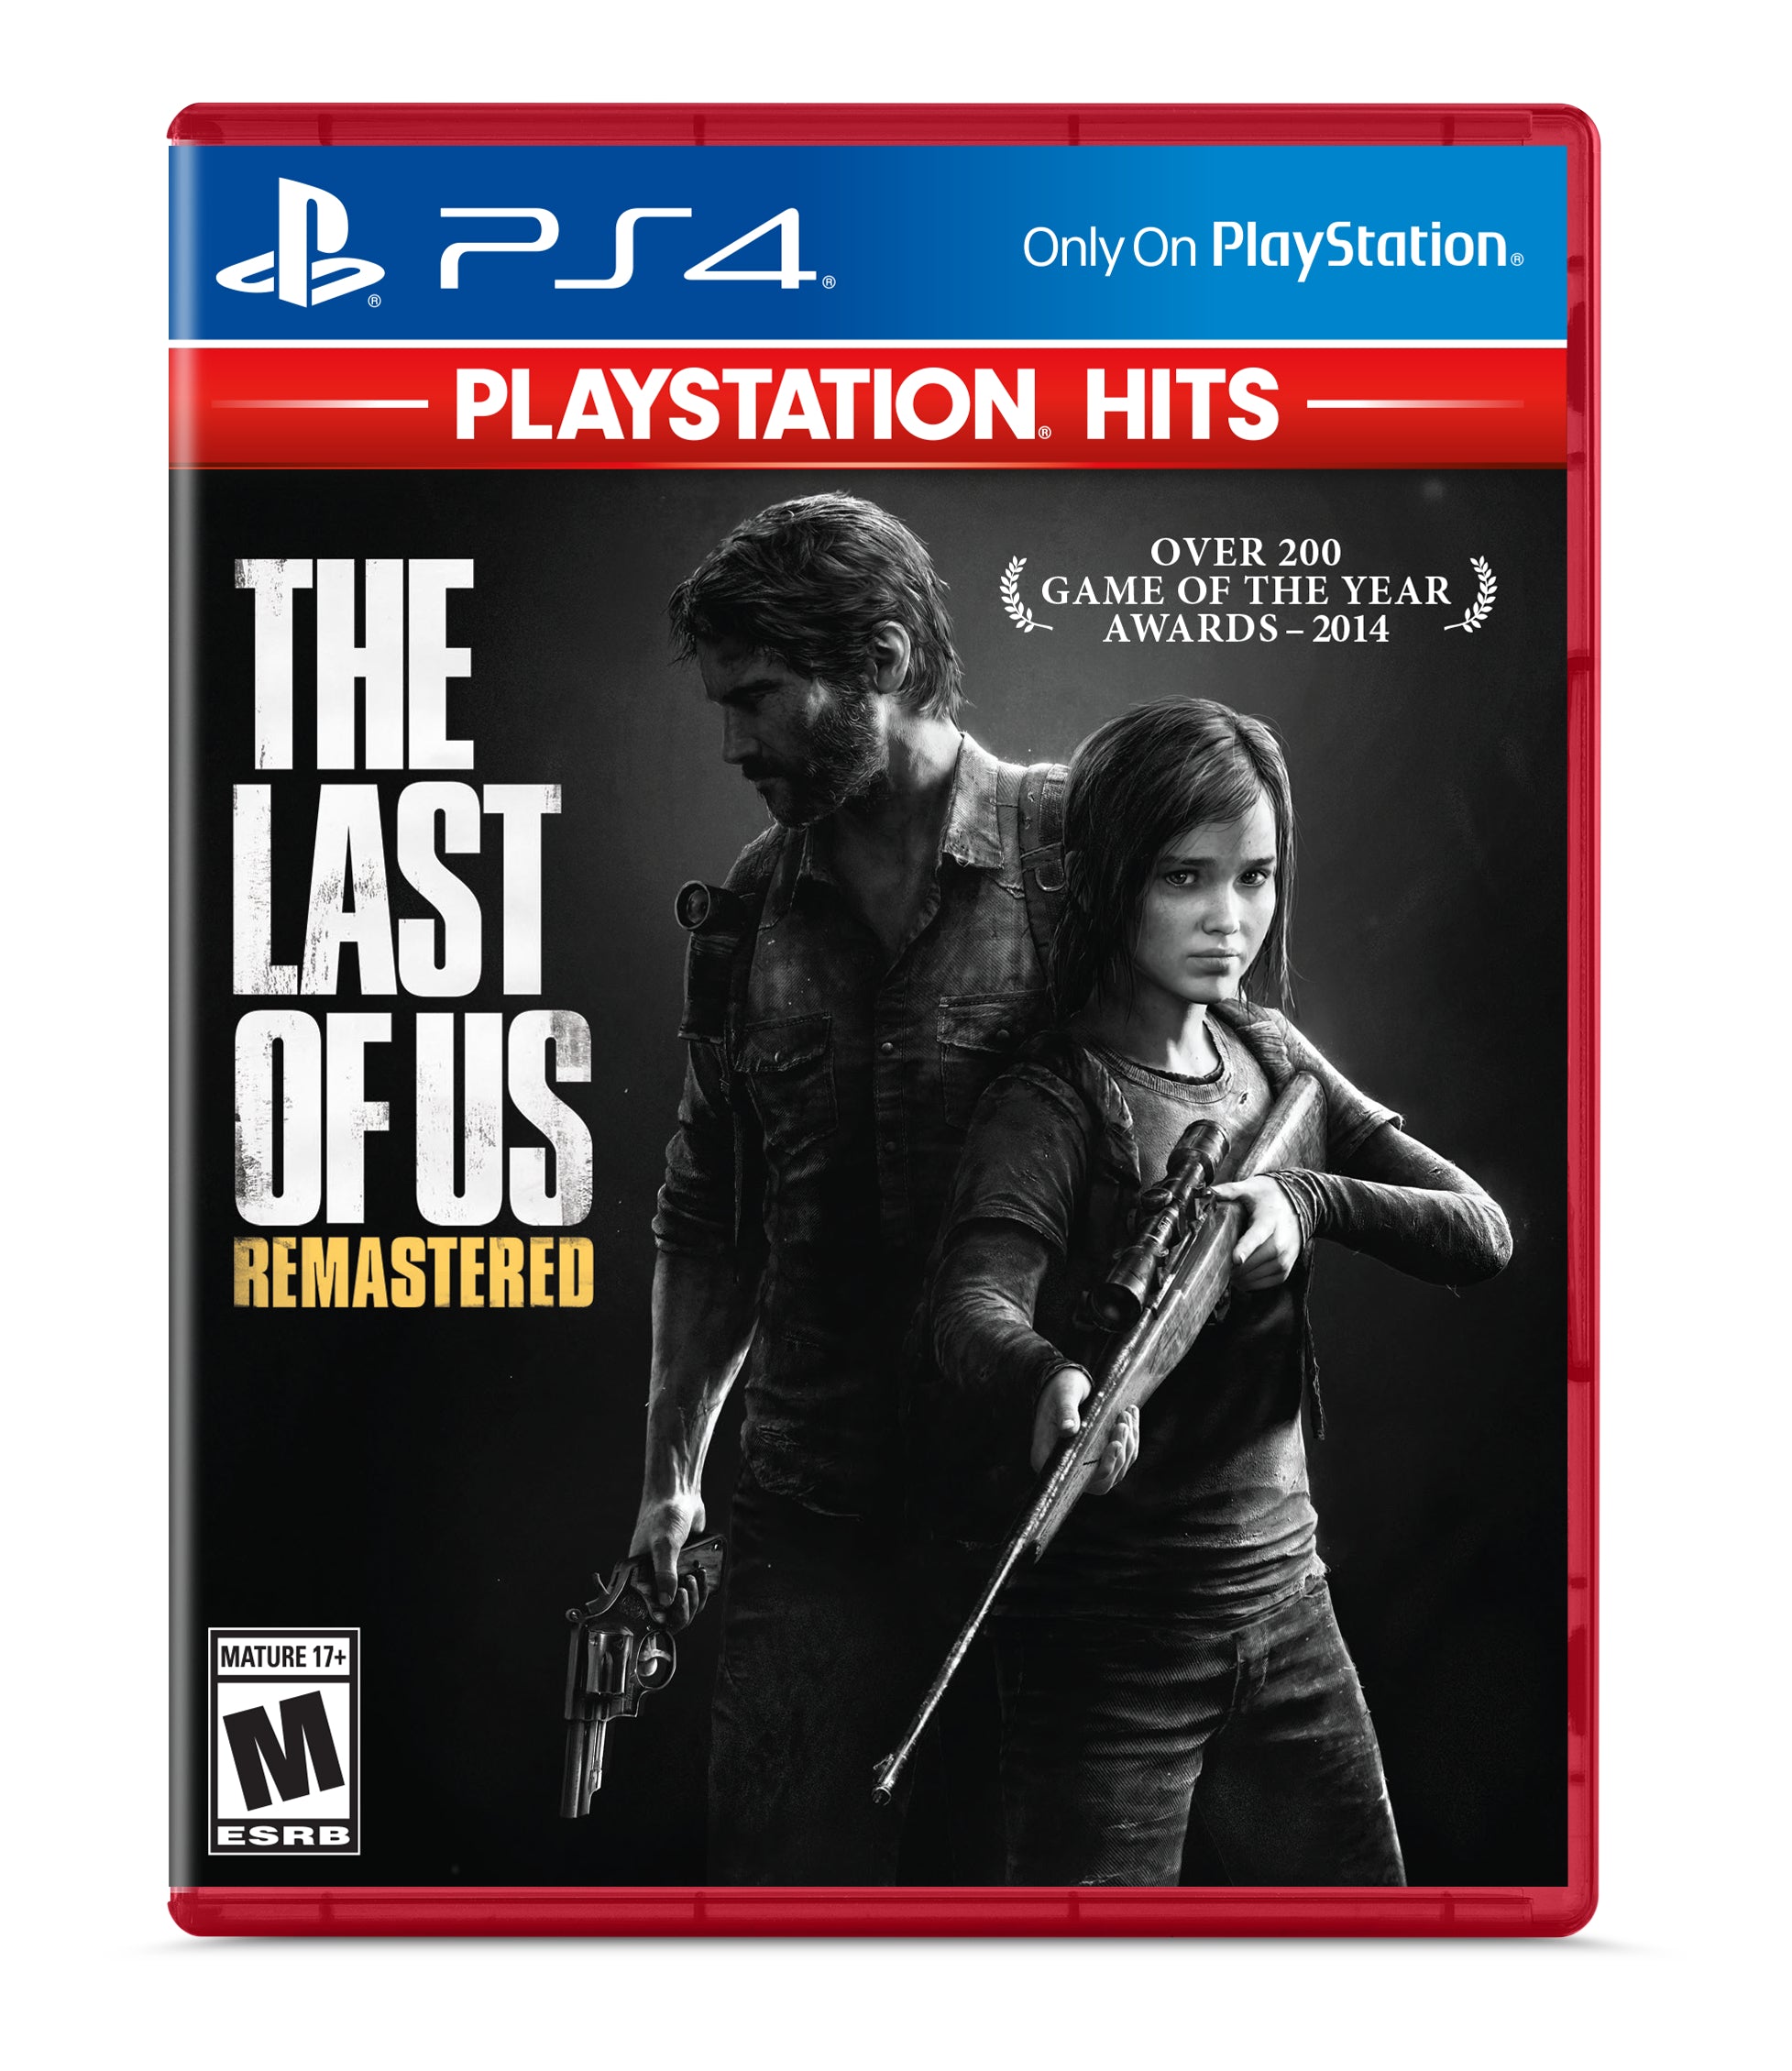 Sony PlayStation 4 Slim The Last of Us: Remastered Bundle Upgrade 1TB SSD PS4 Gaming Console, Jet Black, with Mytrix Chat Headset - Internal Fast Solid State Drive Enhanced PS4 Console